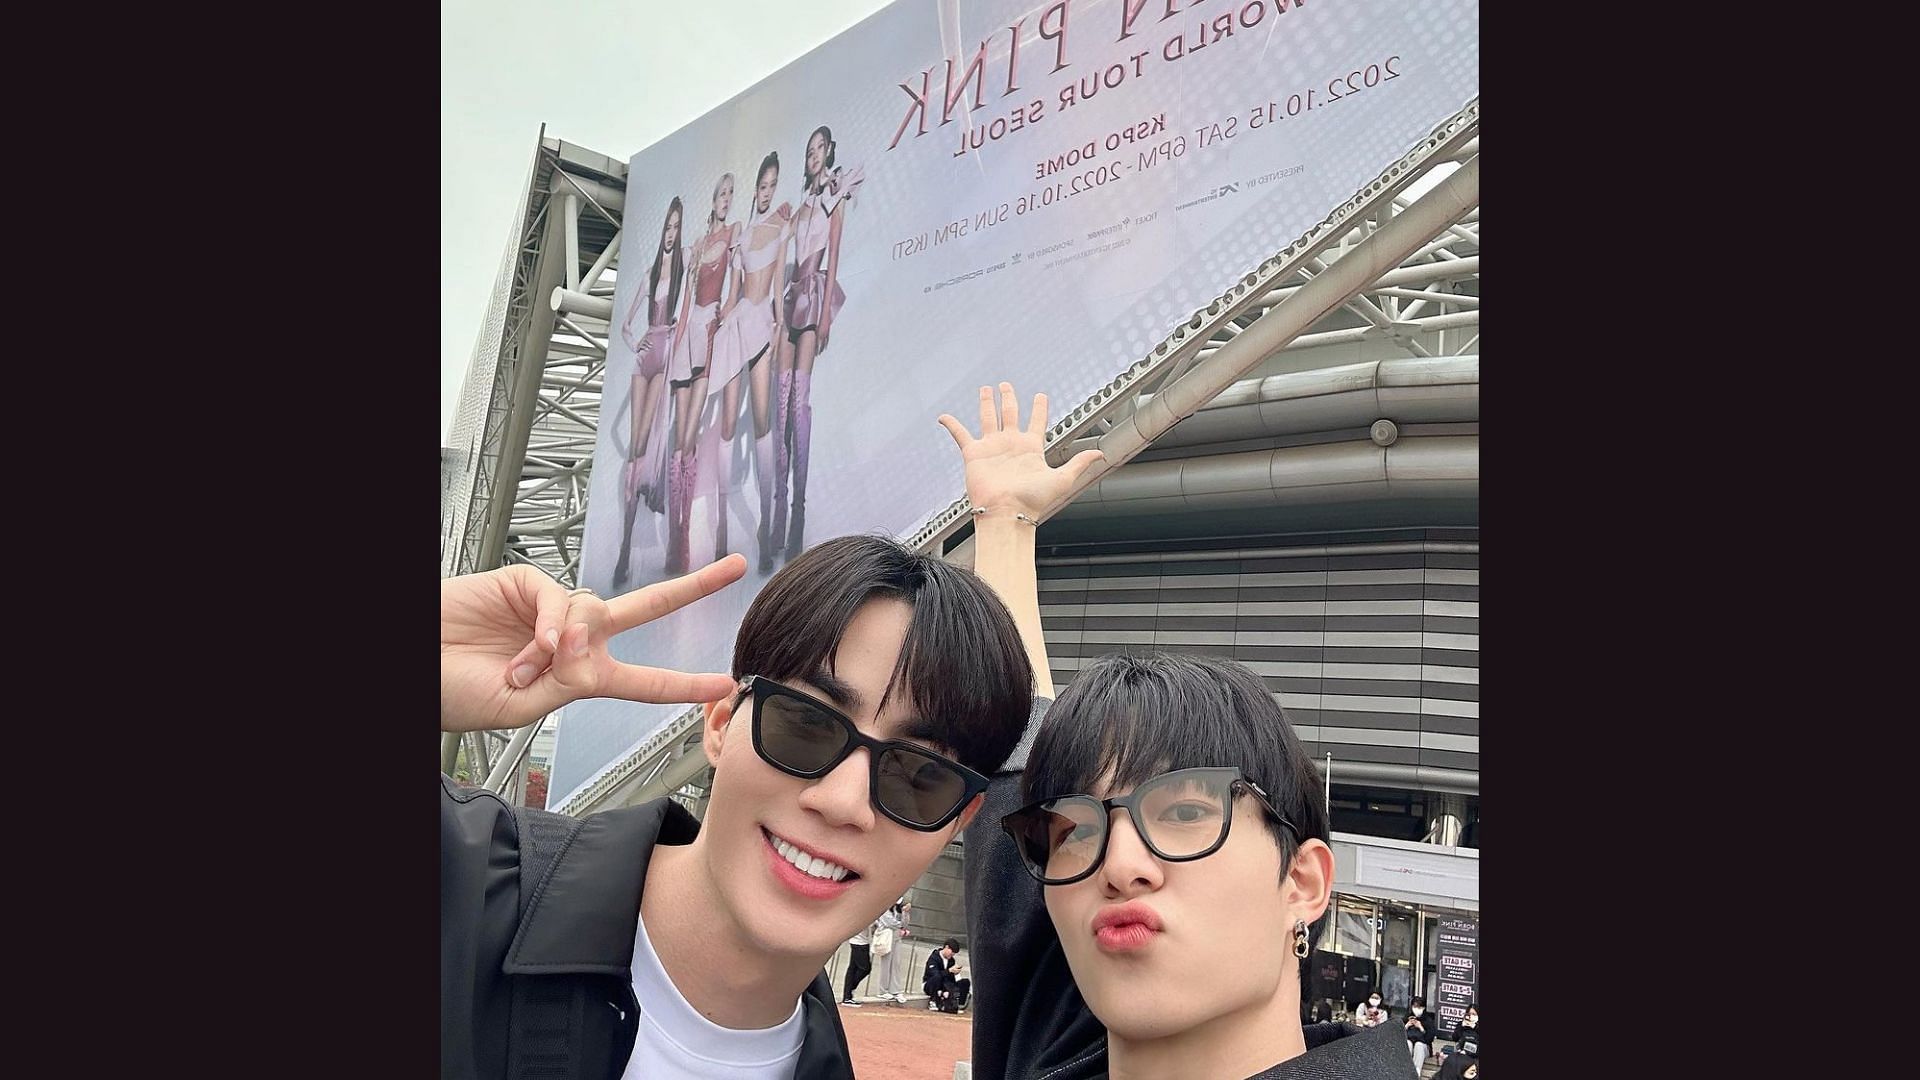 Famous Thai actors Zee Pruk and Nunew were seen enthusiastically attending the second day of the concert despite having their own fanmeeting in Korea a day prior (Image via Instagram/new_cwr)